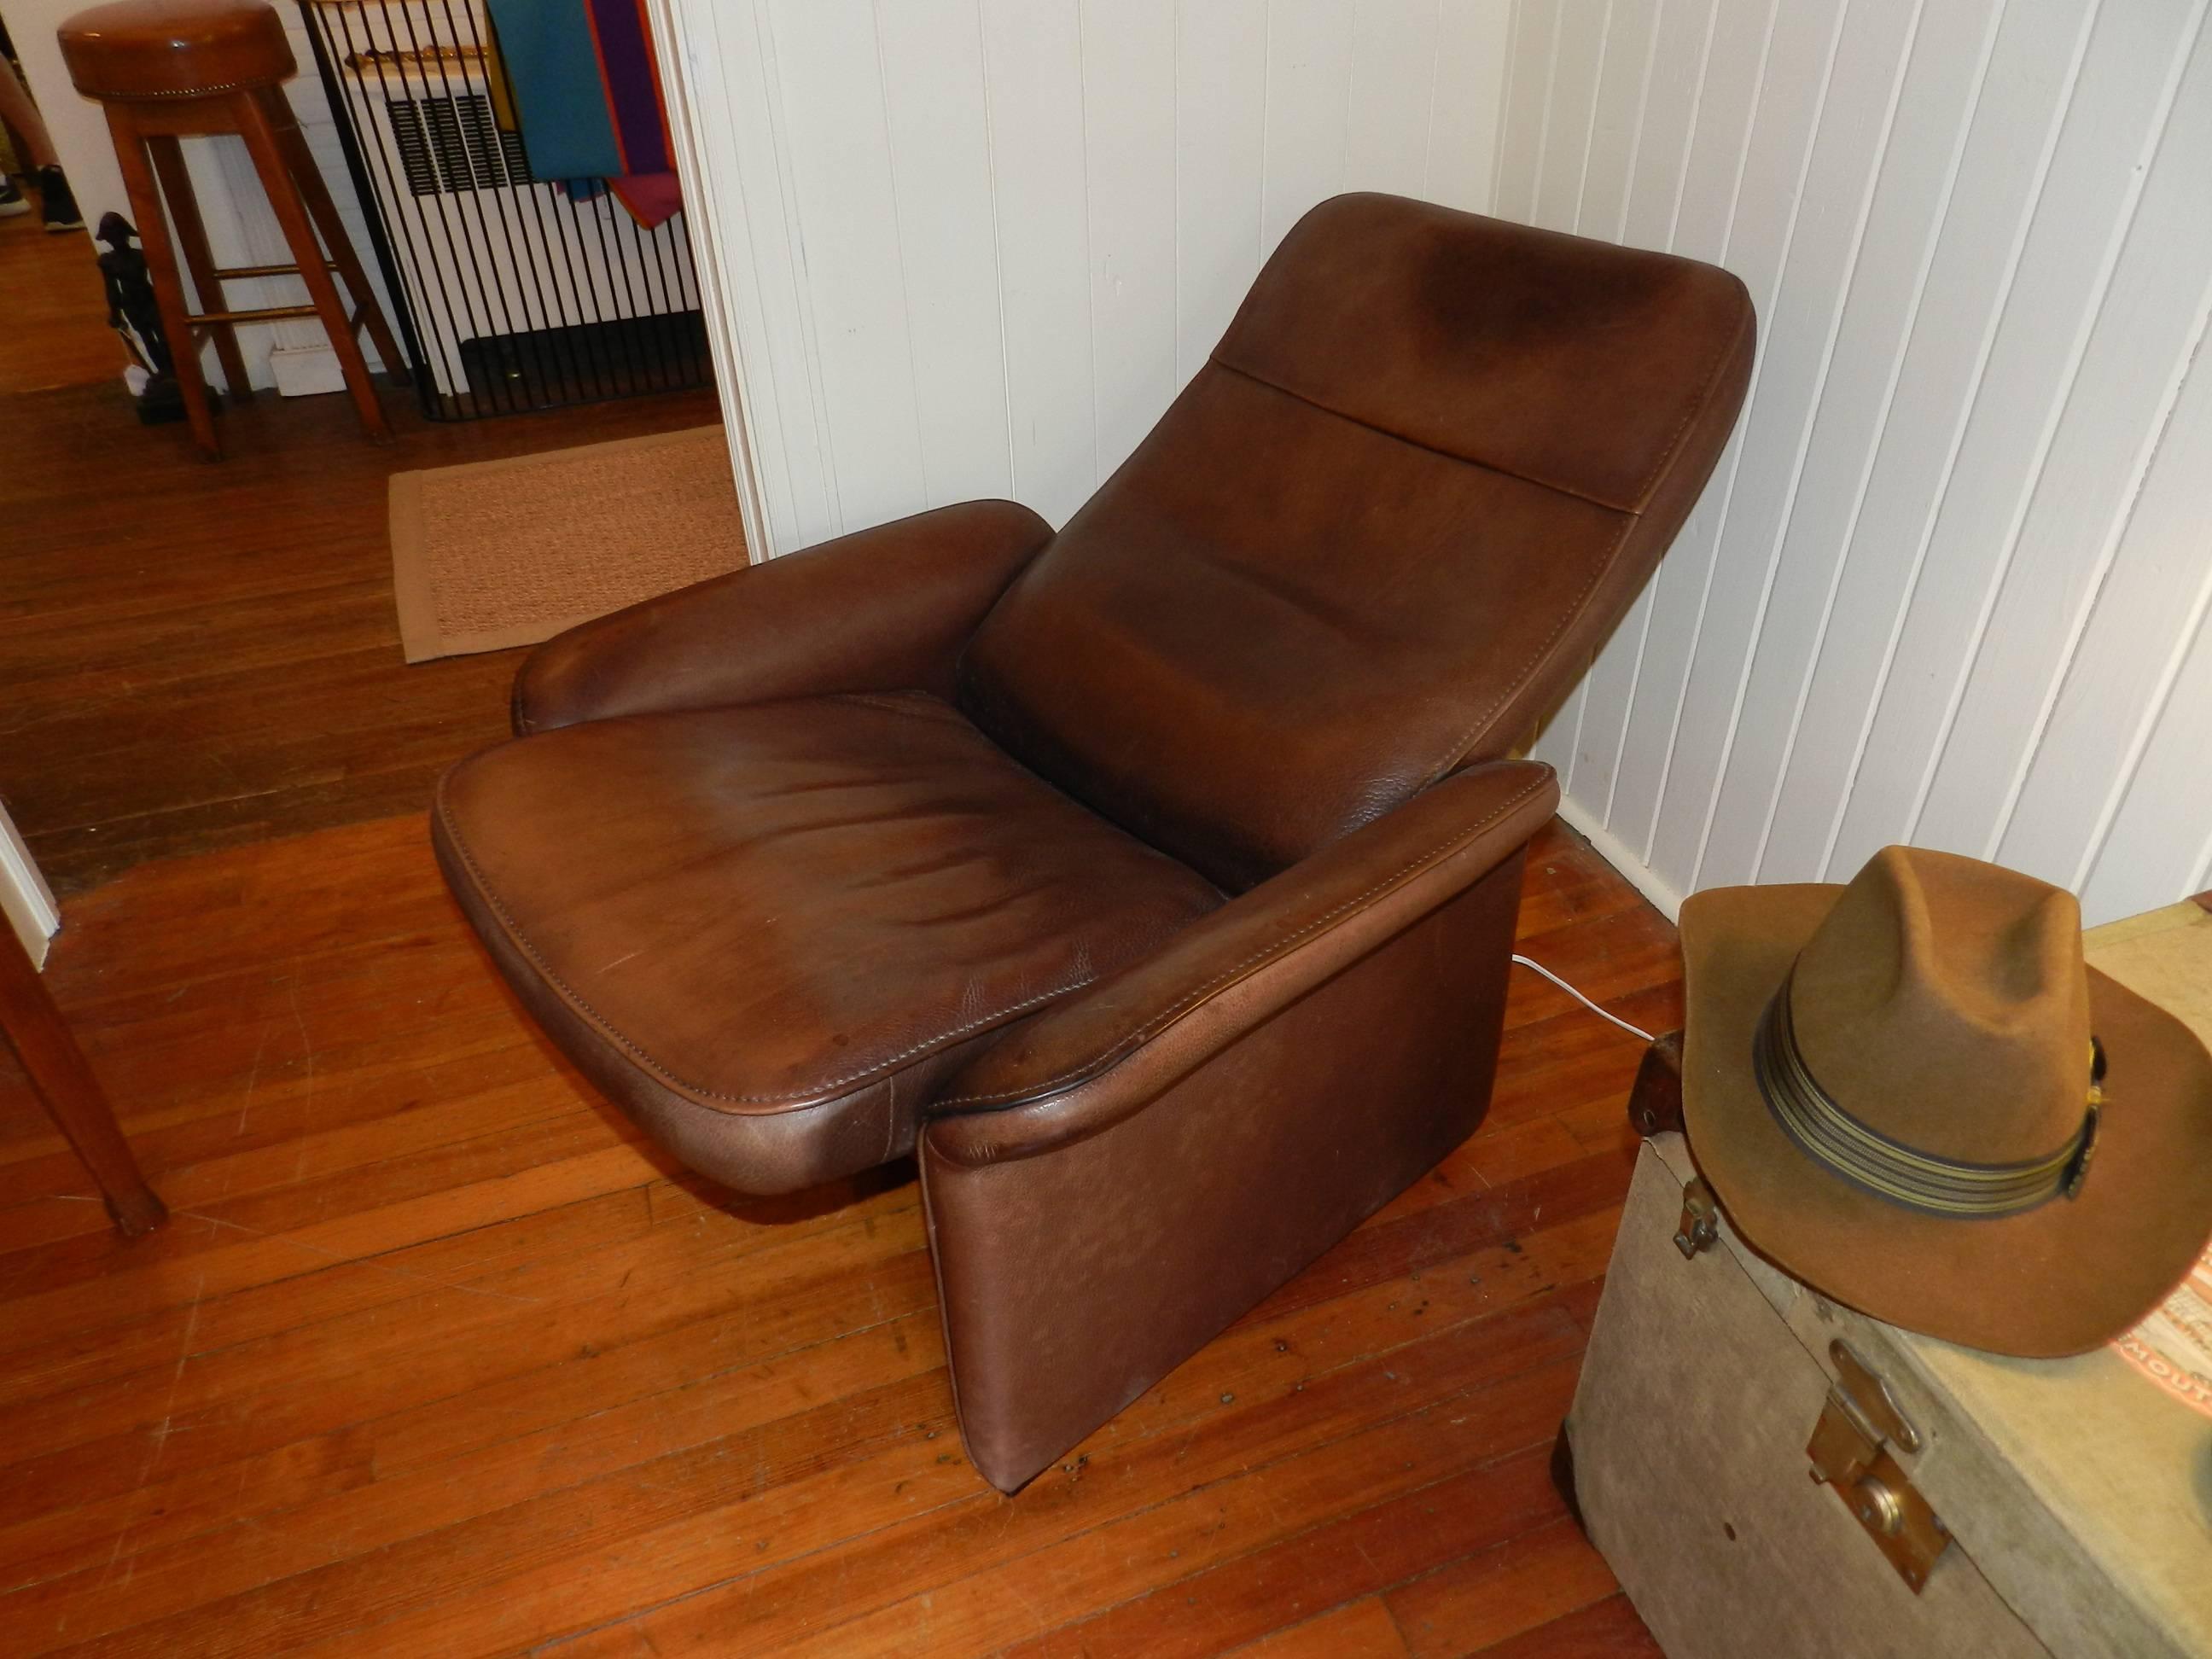 1970s leather recliner by De Sede of Switzerland with beautiful warm patina.